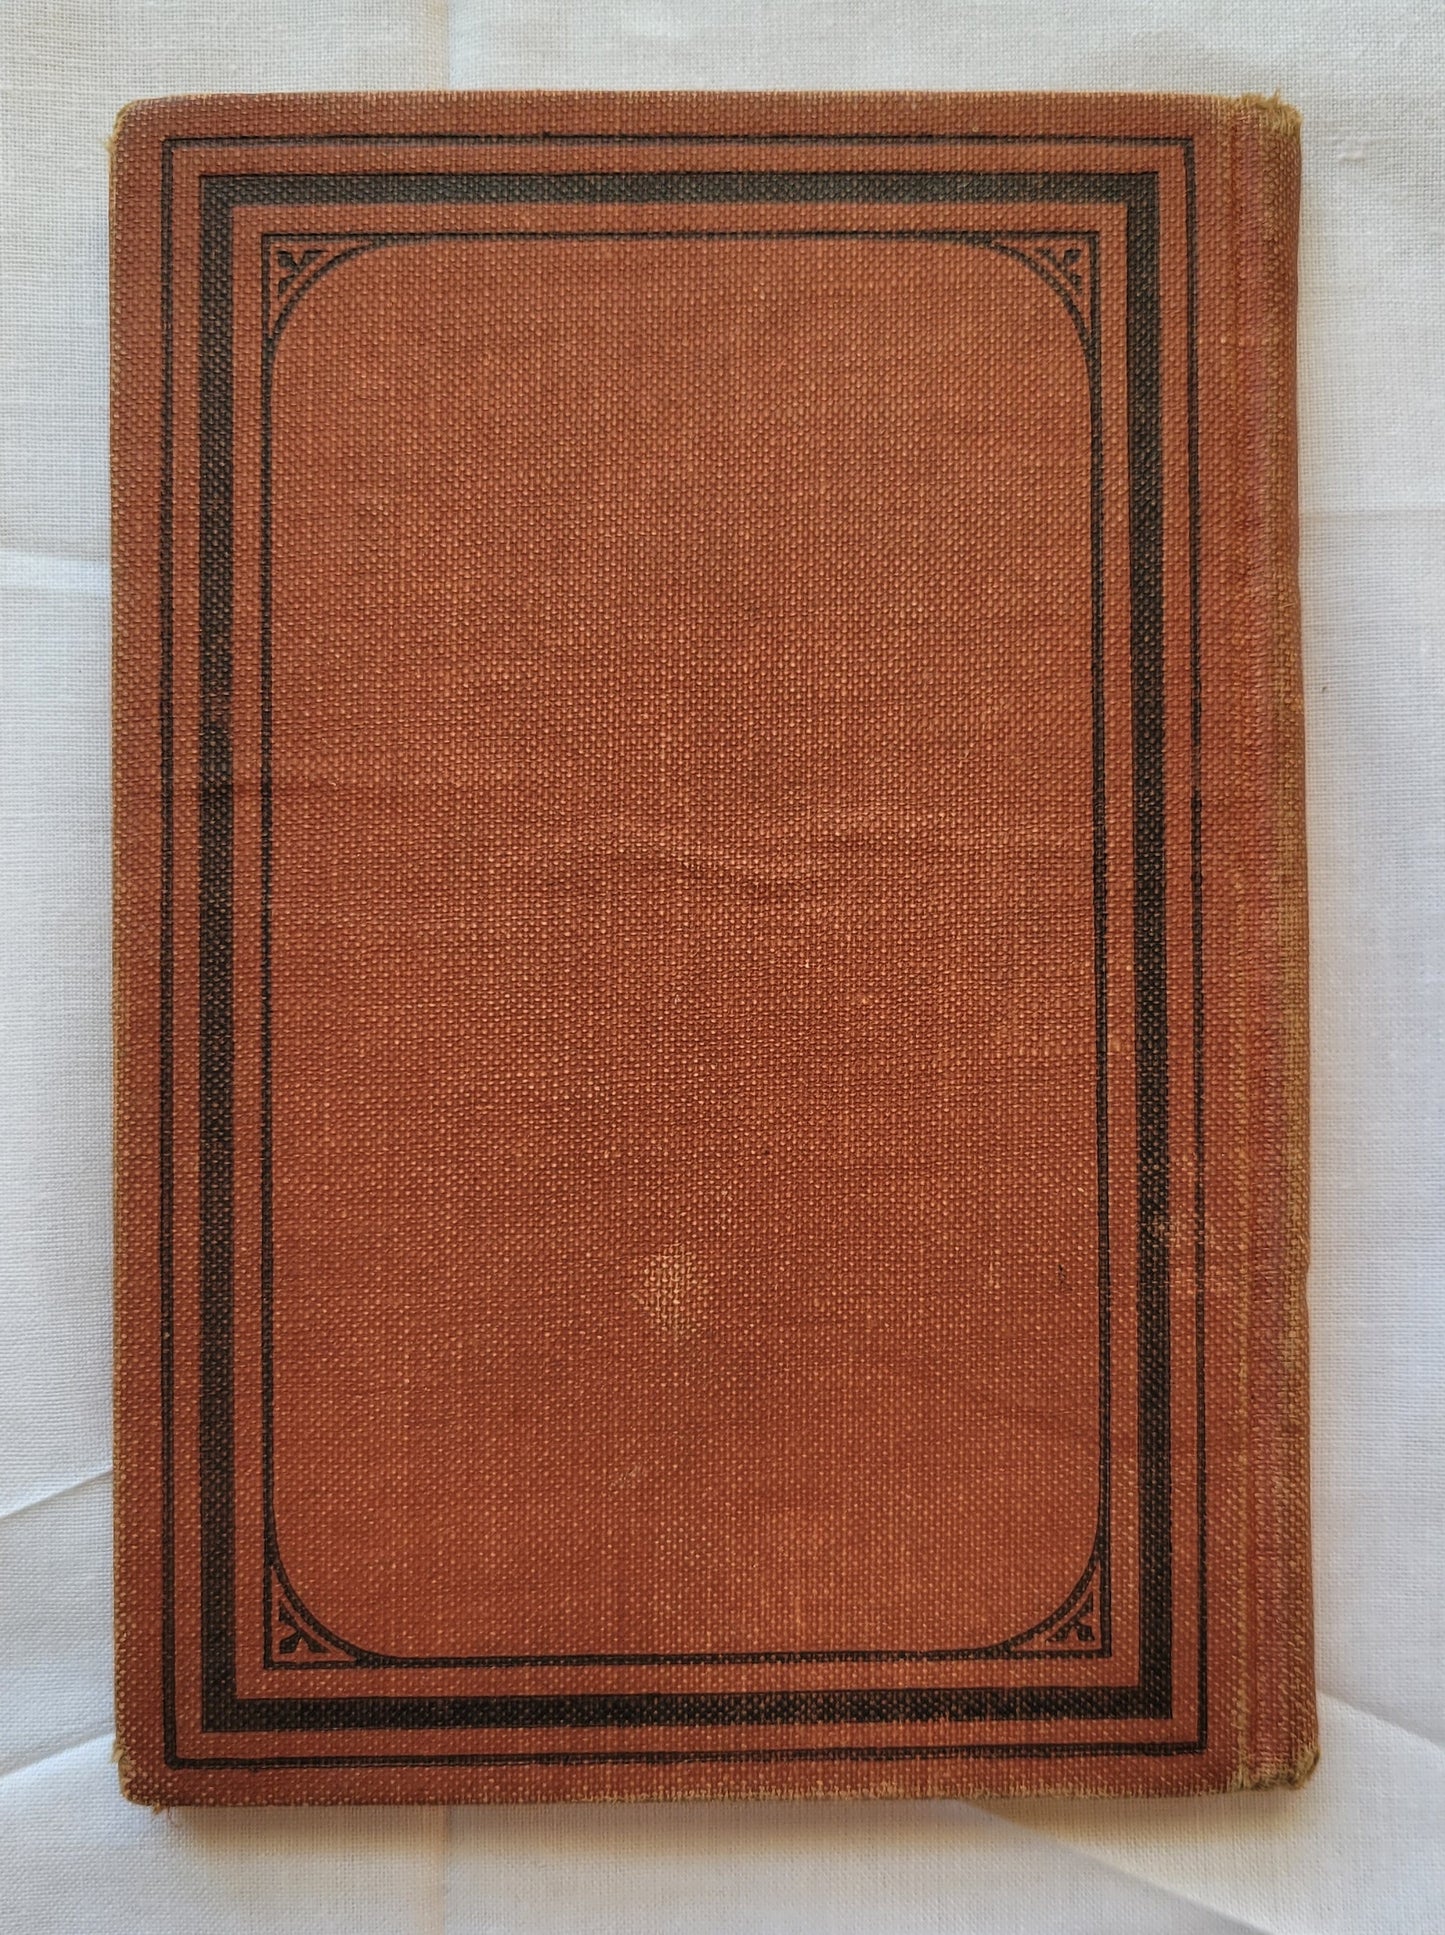 Antique book for sale "The Heidelberg Catechism: With Questions for the Catechetical Class and the Sunday-School by Rec. Aaron Spangler, A.M.", published in 1899 by the Central Publishing House. Back cover.